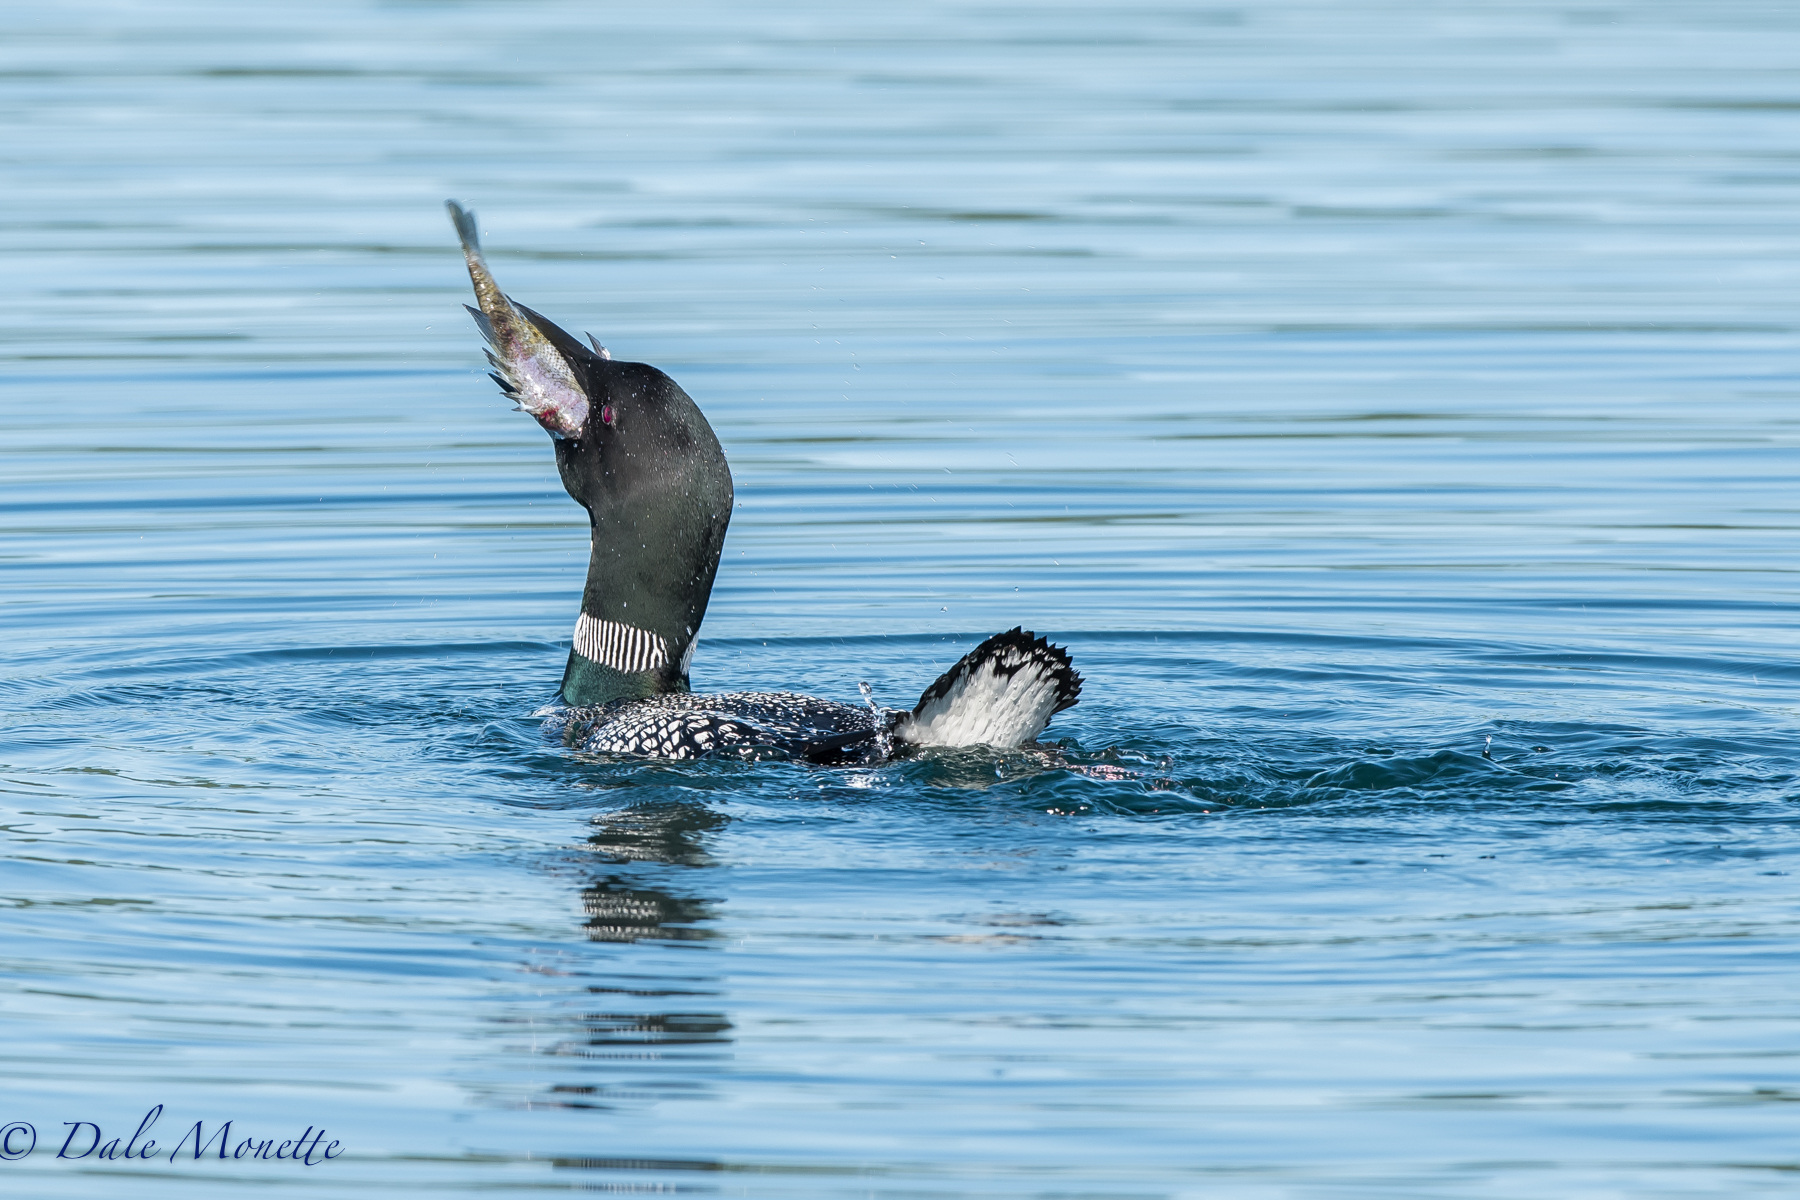    Down the hatch !! well, maybe. We saw this female loon struggling with a sunfish this morning at Quabbin.&nbsp;When we left her she was still working on the fish. When we returned to the area 3 hours later she was still there but the fish was gone